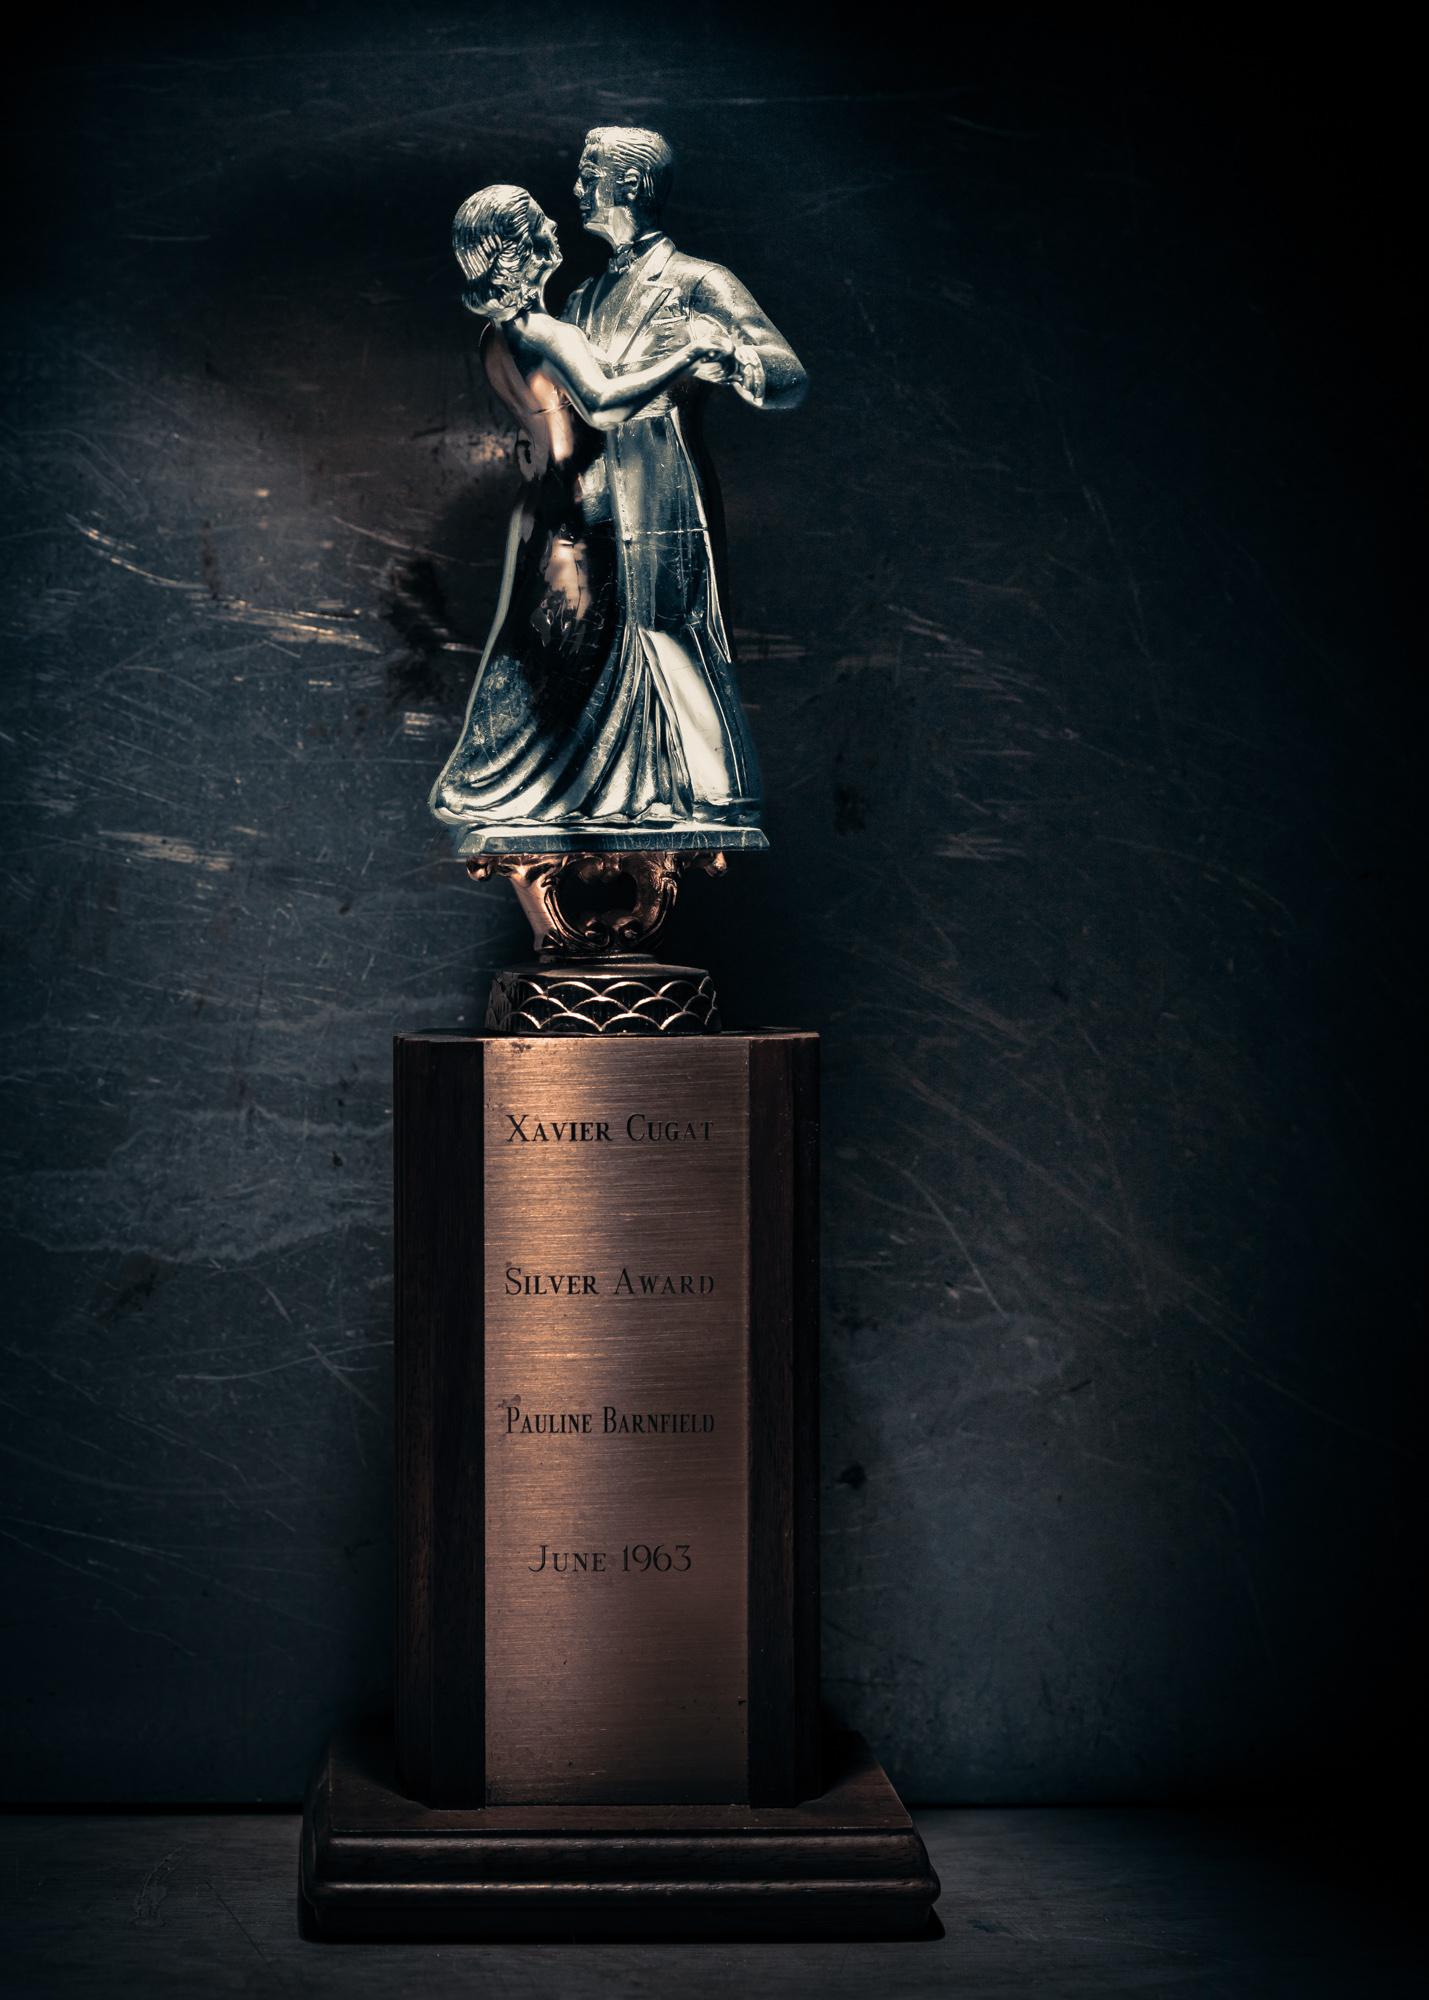 Limited Edition Color Photograph - Classic Vintage Sports Trophy, 2024, 17 x 22. Still life archival photograph created from the photographer's personal collection of vintage trophies.

About Howard Lewis:
Lewis’ artistic practice often explores